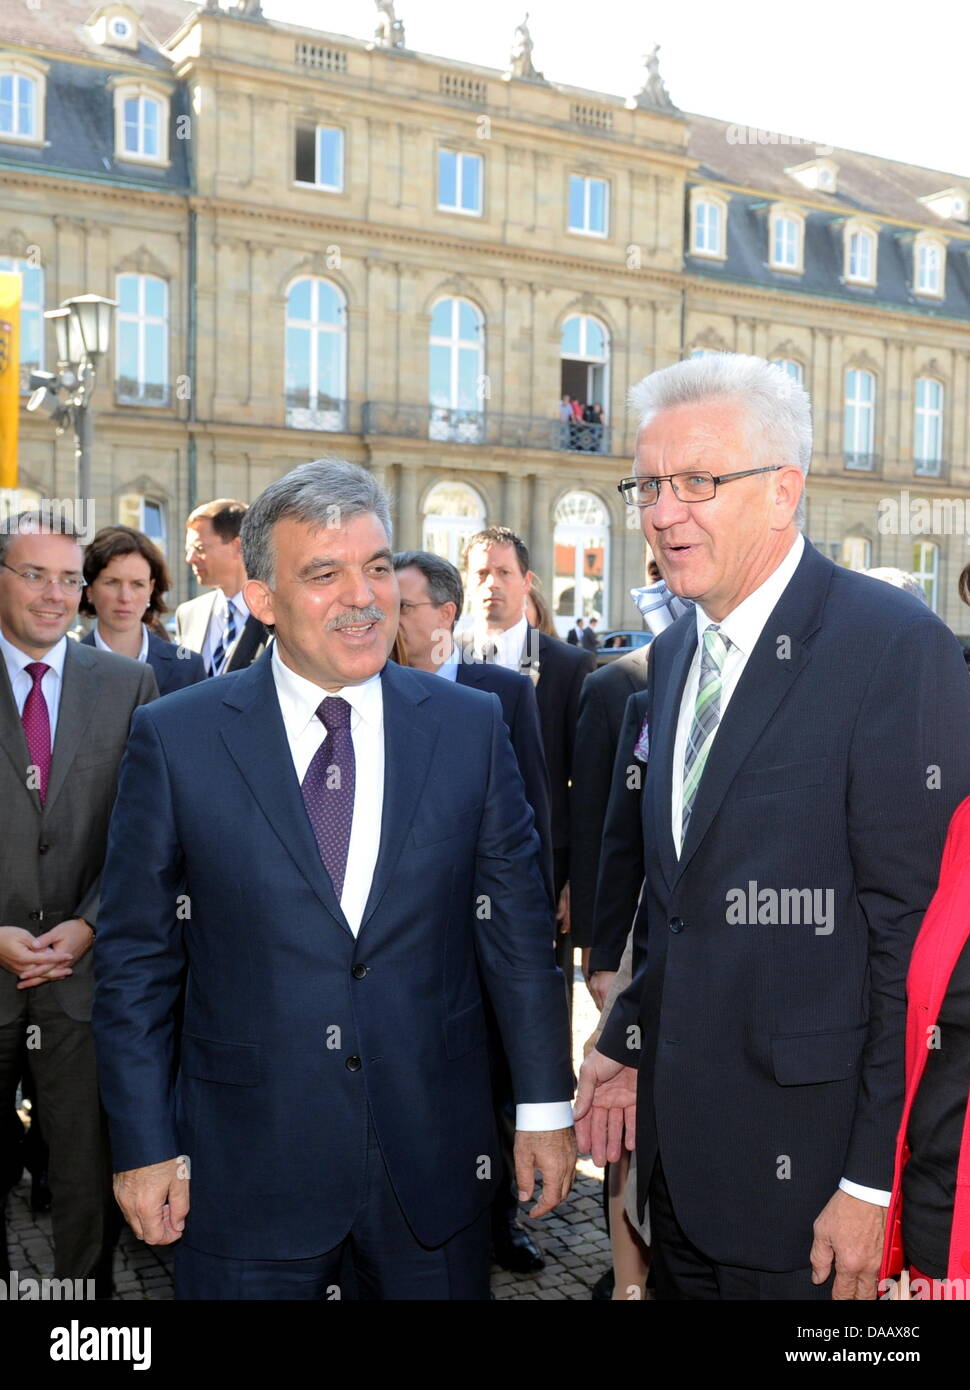 The Turkish President Abdullah Gul (L) and and Prime Minister of Baden-Wuerttemberg Winfried Kretschmann (R) stand in front of the New Palace in Stuttgart, Germany, 21 September 2011. Gul visited Stuttgart during his three-day-visit to Germany. Photo: BERND WEISSBROD Stock Photo